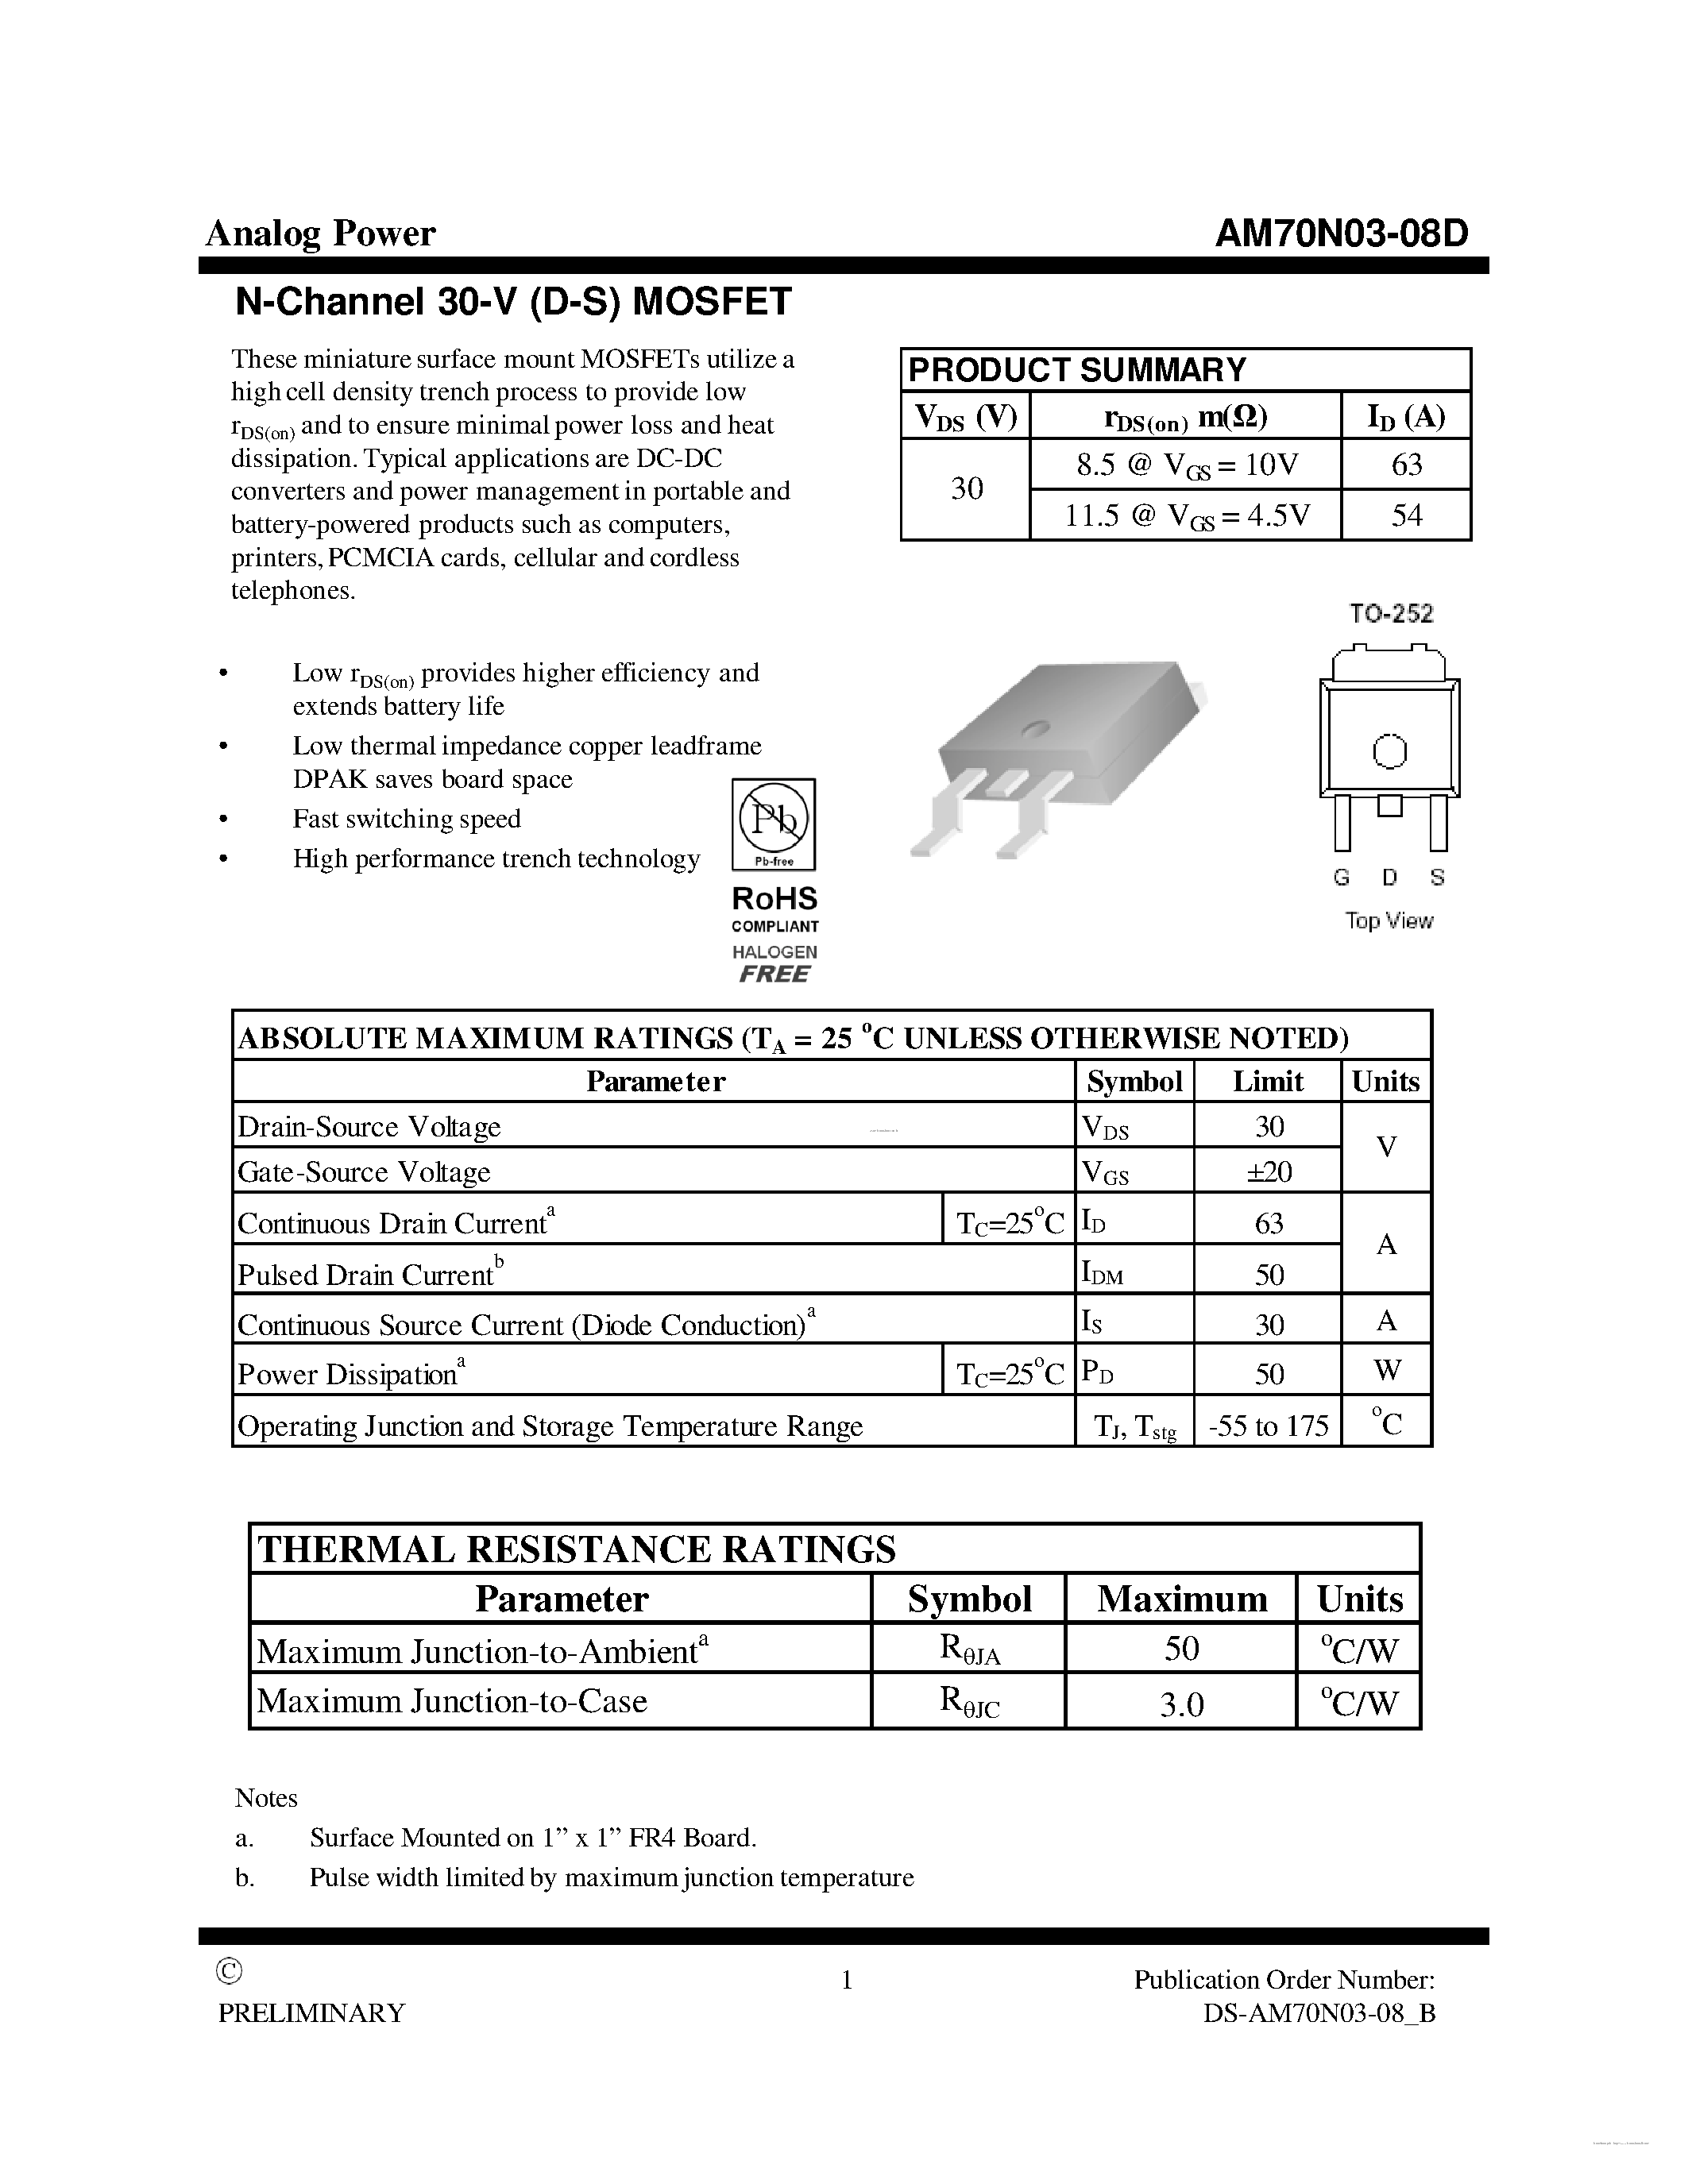 Datasheet AM70N03-08D - MOSFET page 1